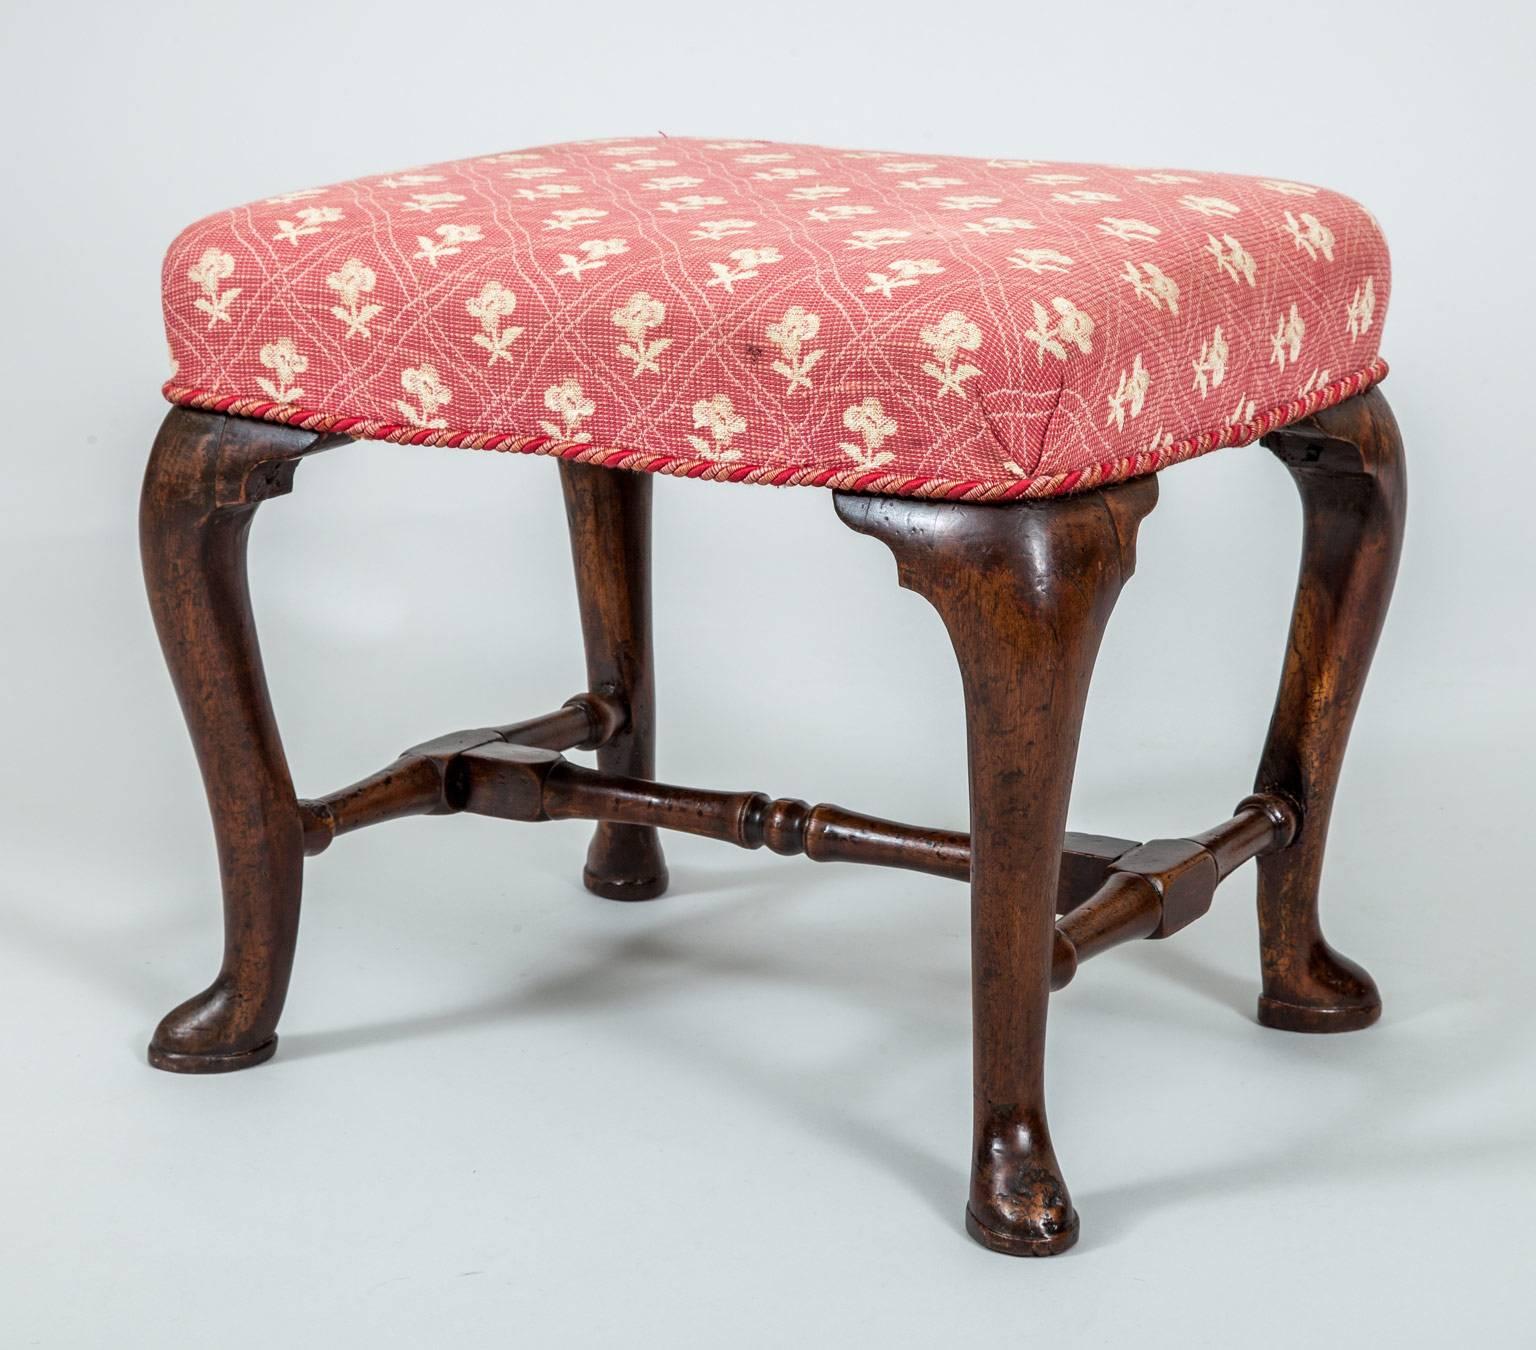 Antique Queen Anne walnut stool with cabriole legs joined by carved and turned H-shaped stretchers raised on pad feet.